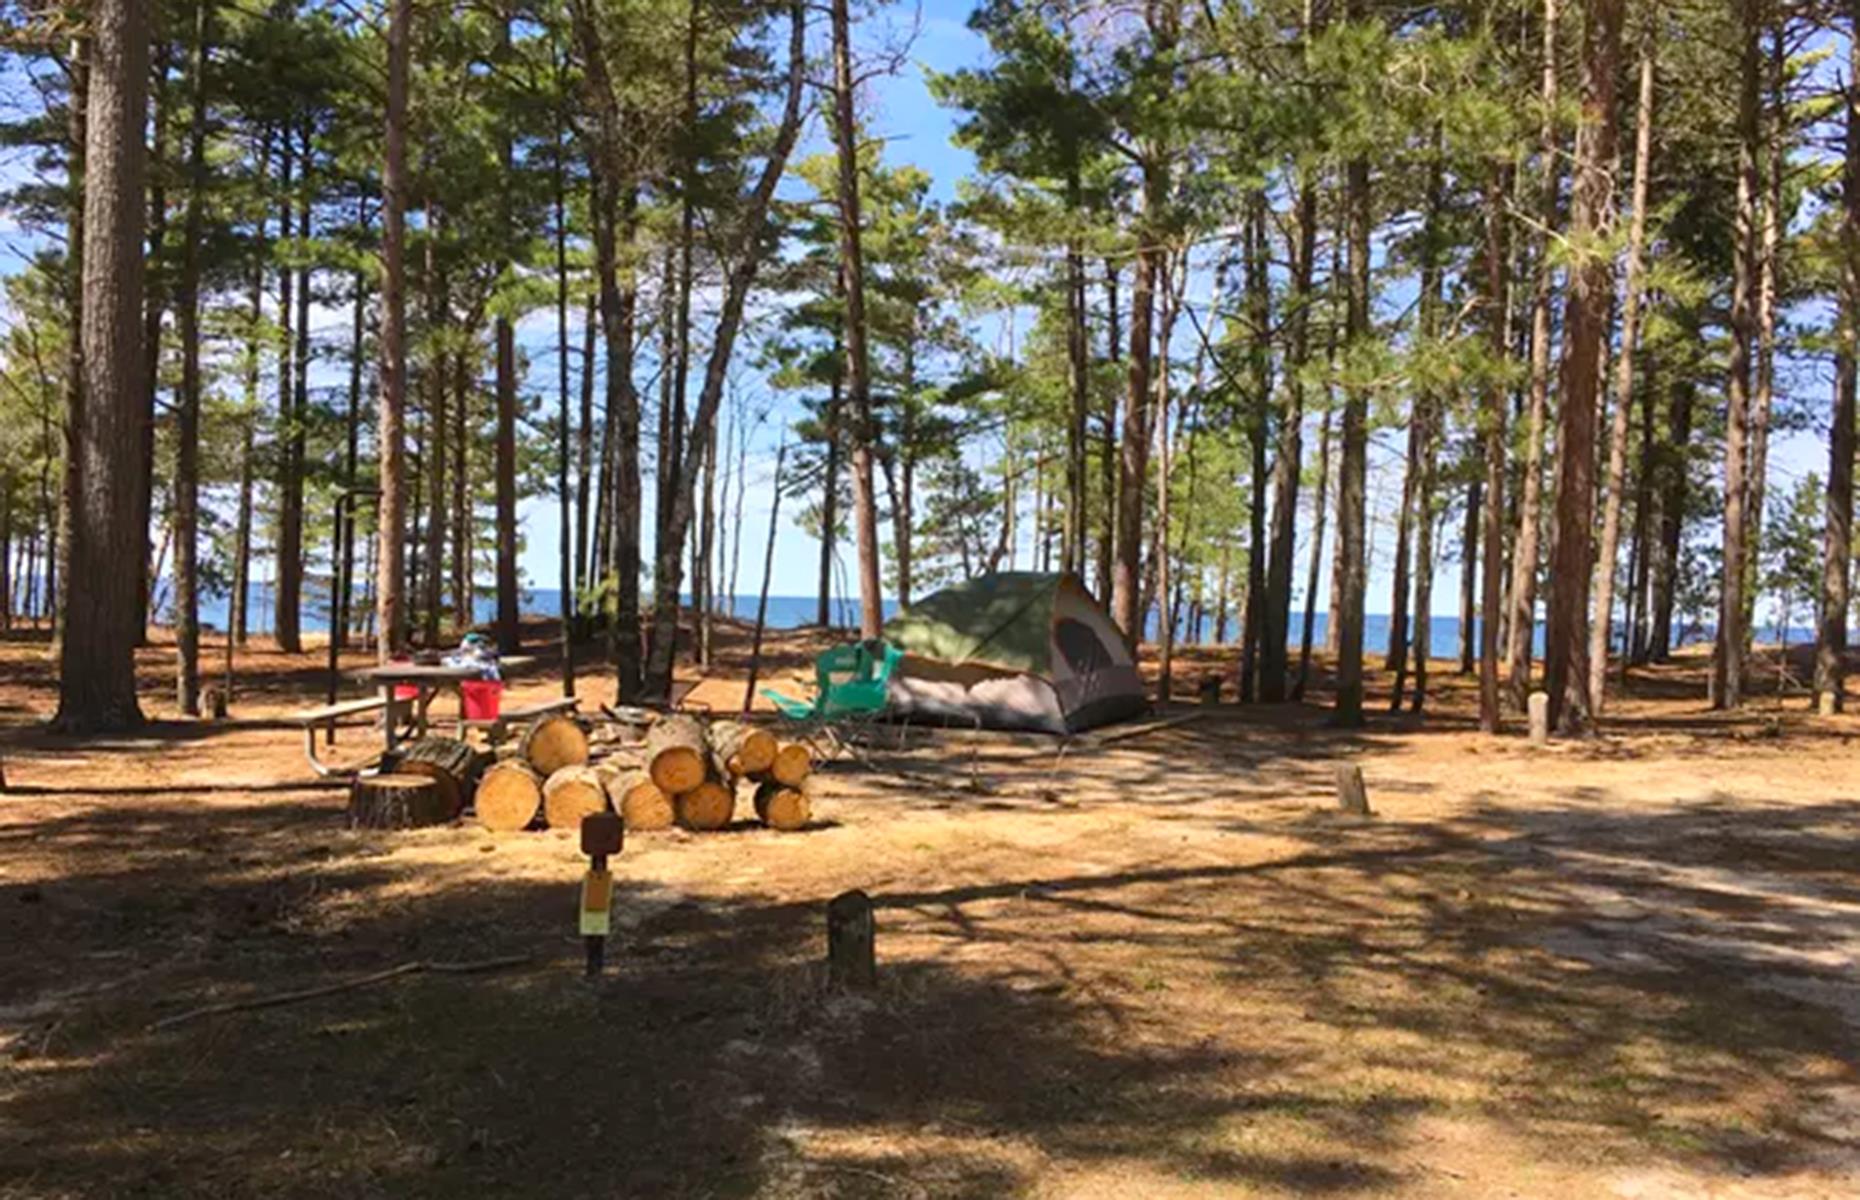 <p>Few campground locations have more star quality than this one. The simple plots at this back-to-nature site place you within kissing distance of the vast waters of Lake Superior. You'll see the endless blue expanse peeping from between the pines and hemlocks that swaddle your pitch. There are just 36 rustic sites available, and you'll have use of picnic tables, fire rings and pit toilets. </p>  <p><a href="https://www.loveexploring.com/galleries/87189/28-camping-and-rv-hacks-that-are-borderline-genius?page=1"><strong>These camping and RV hacks are borderline genius</strong></a></p>